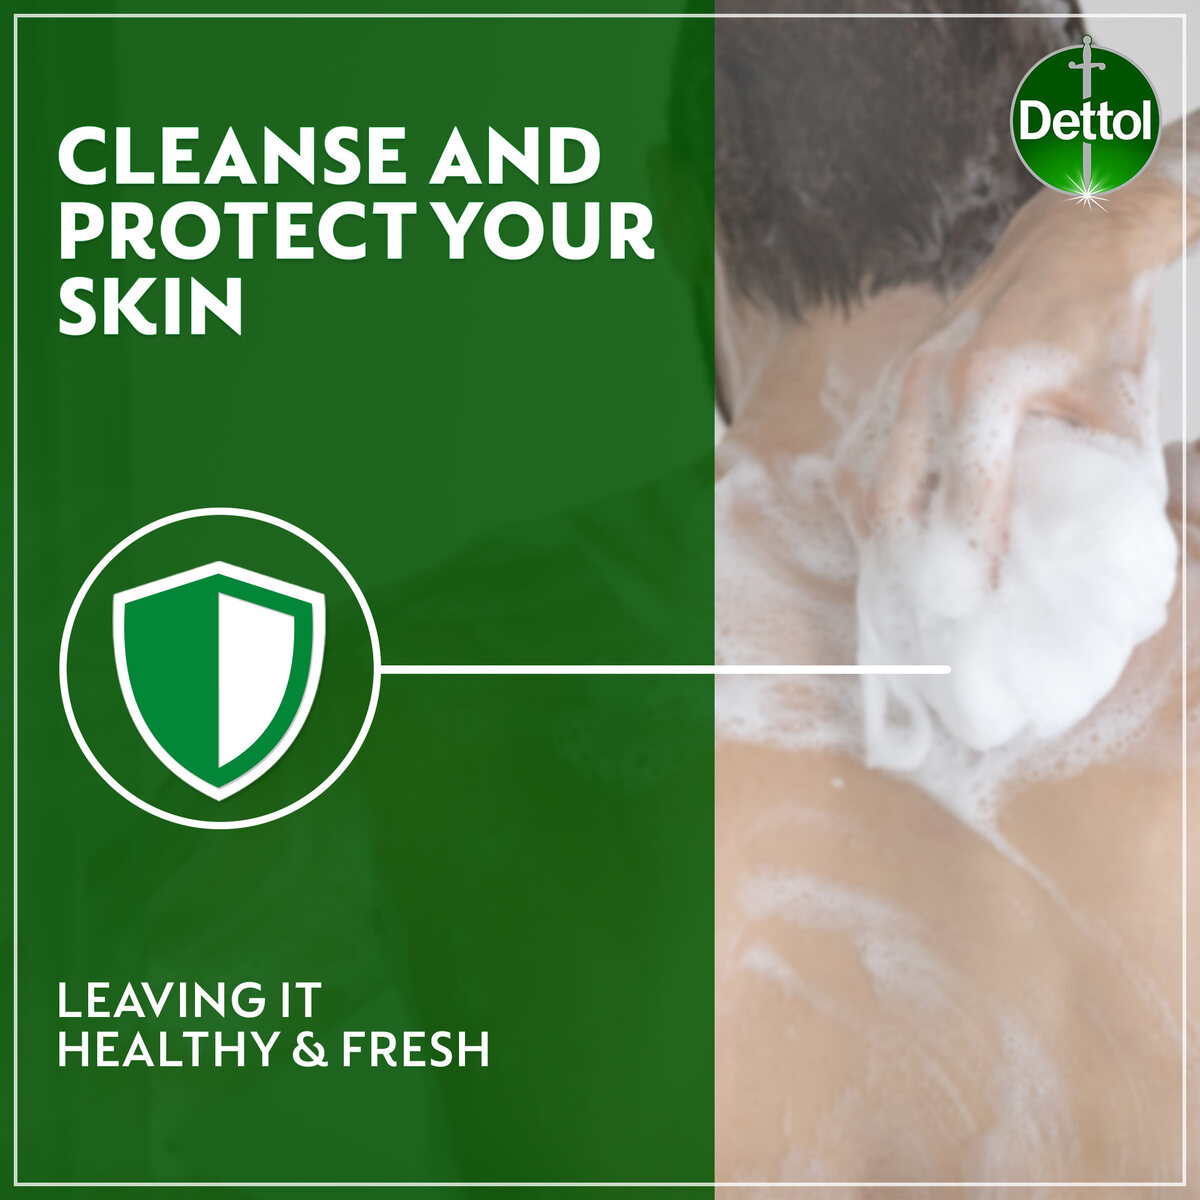 Dettol Instant Cool Anti-Bacterial Bathing Soap Bar Menthol And Eucalyptus Fragrance 165 g